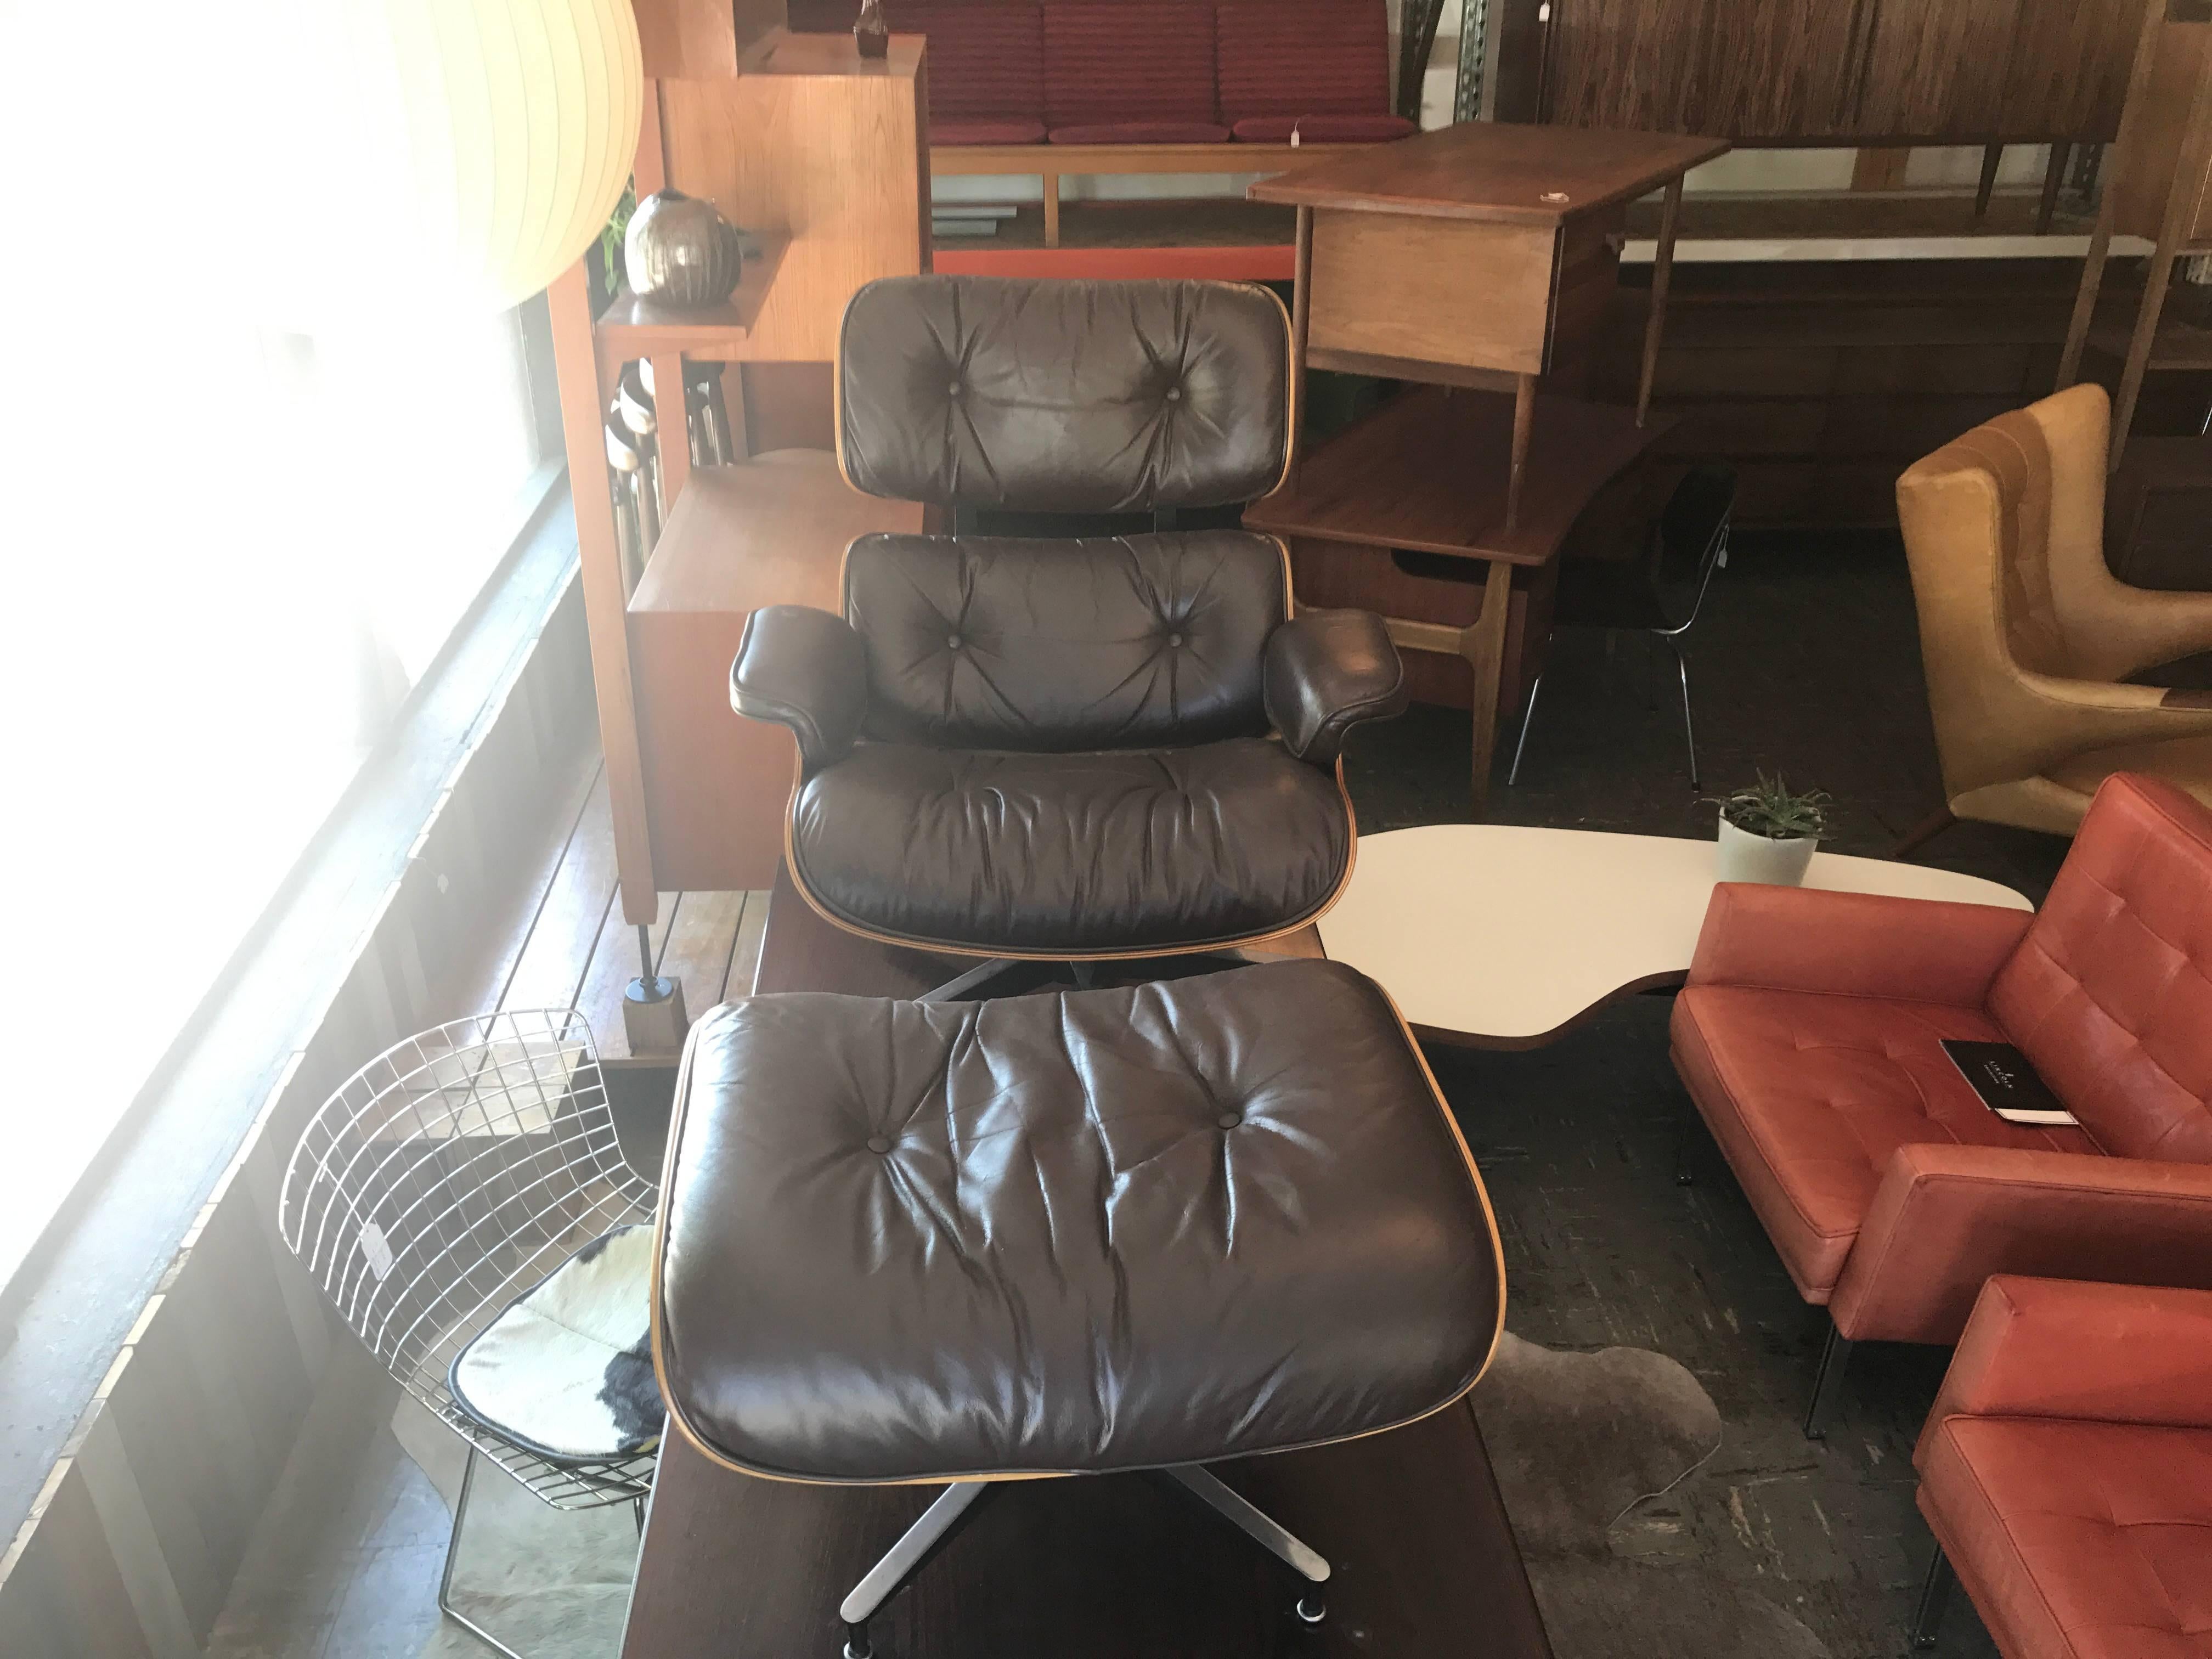 Vintage eames lounge in great vintage condition 
normal wear from age and use.